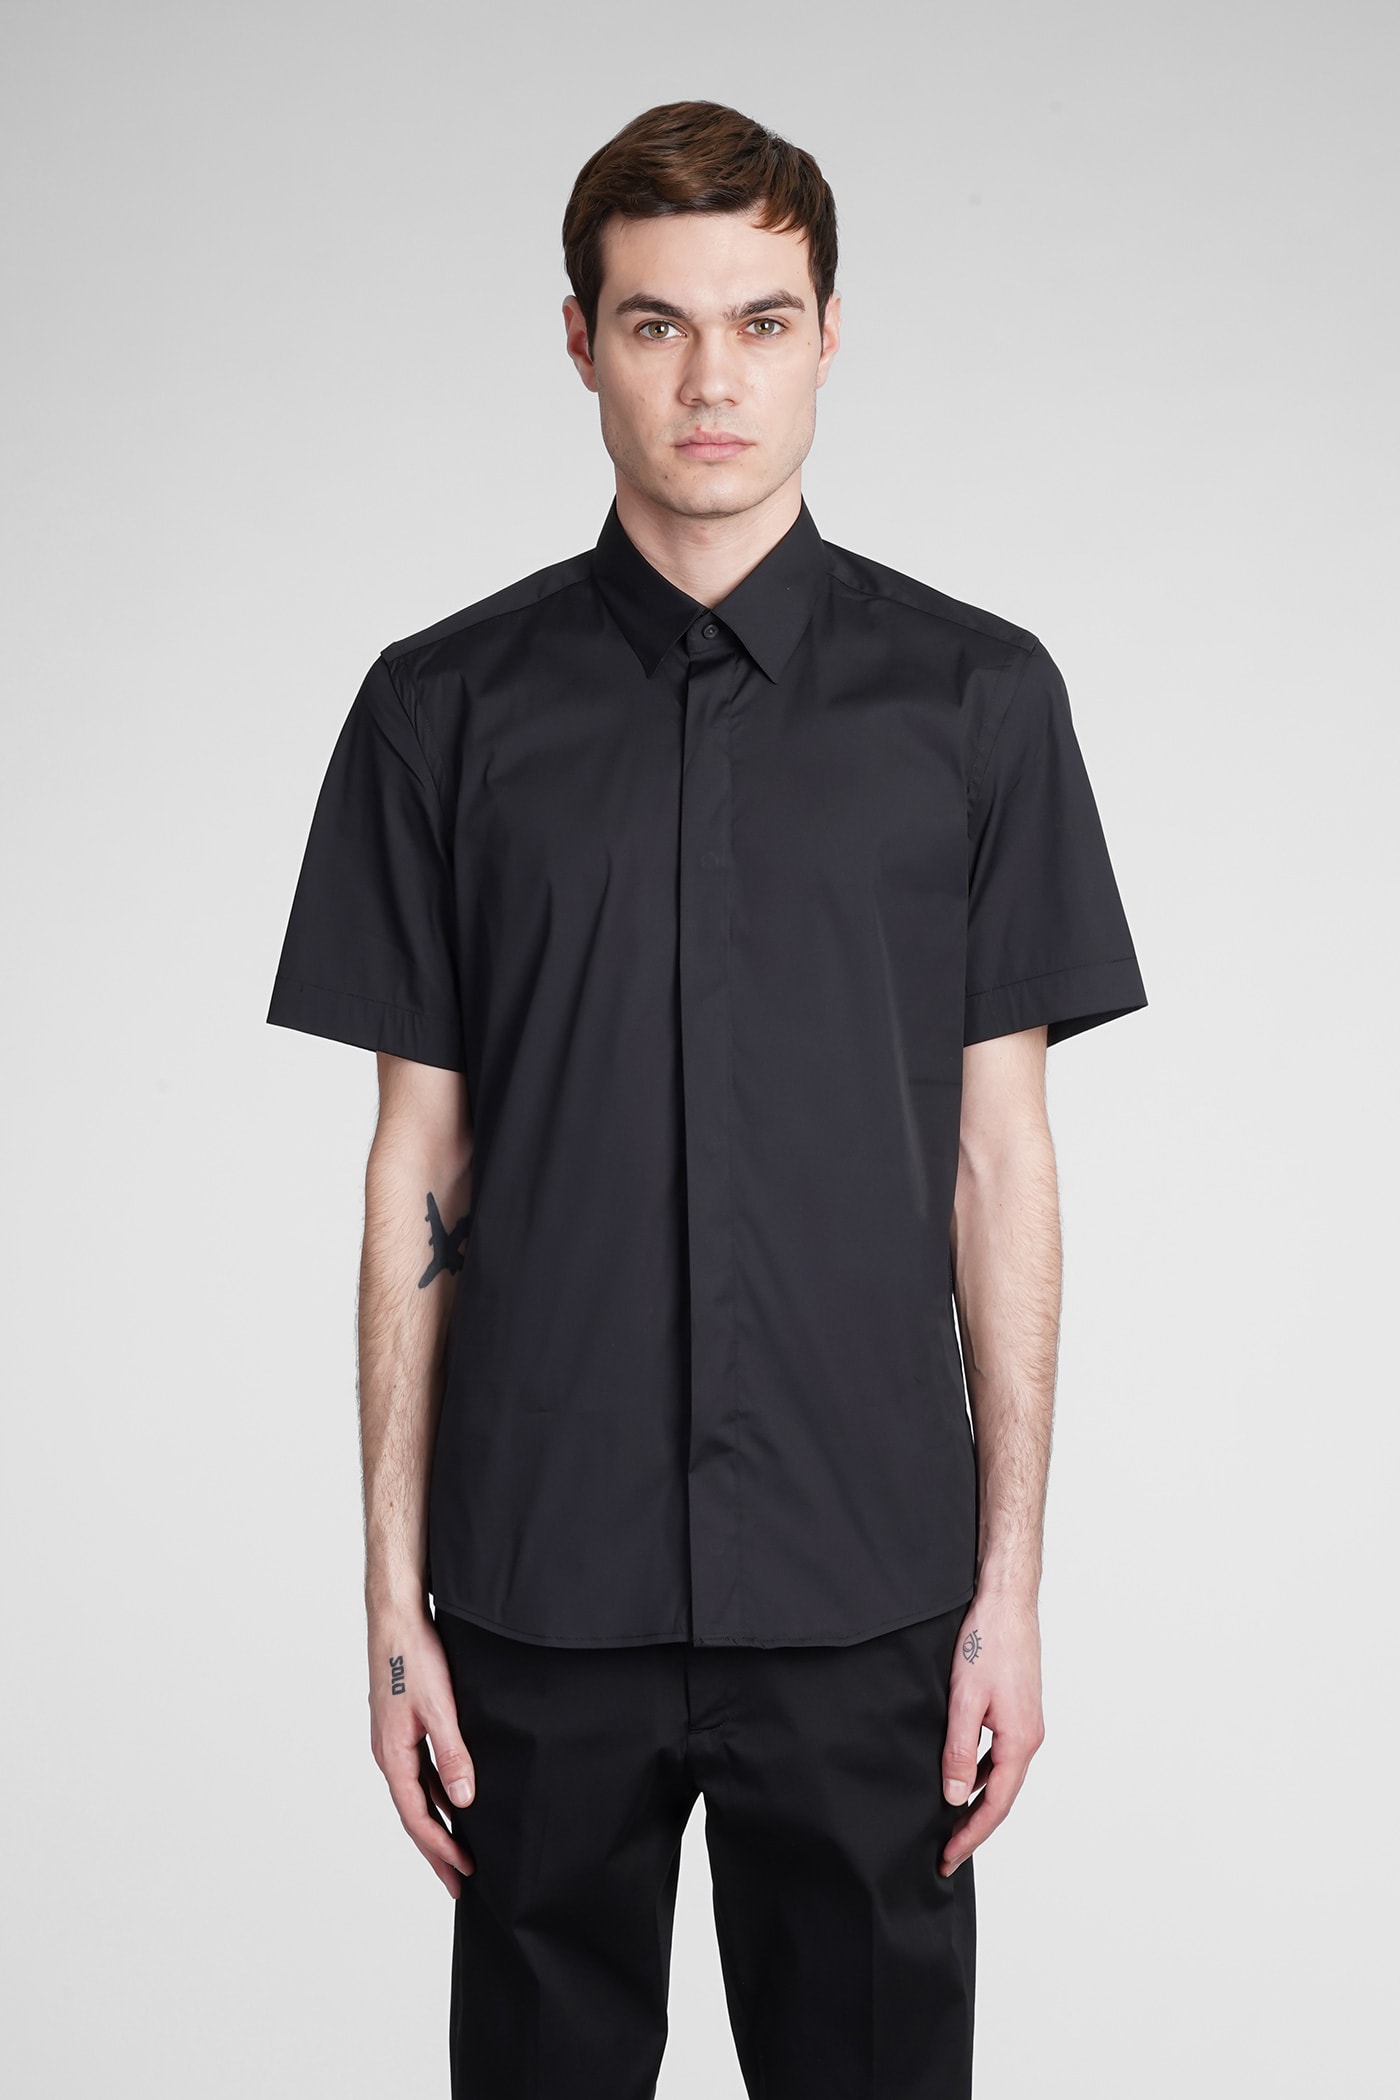 LOW BRAND SHIRT IN BLACK COTTON